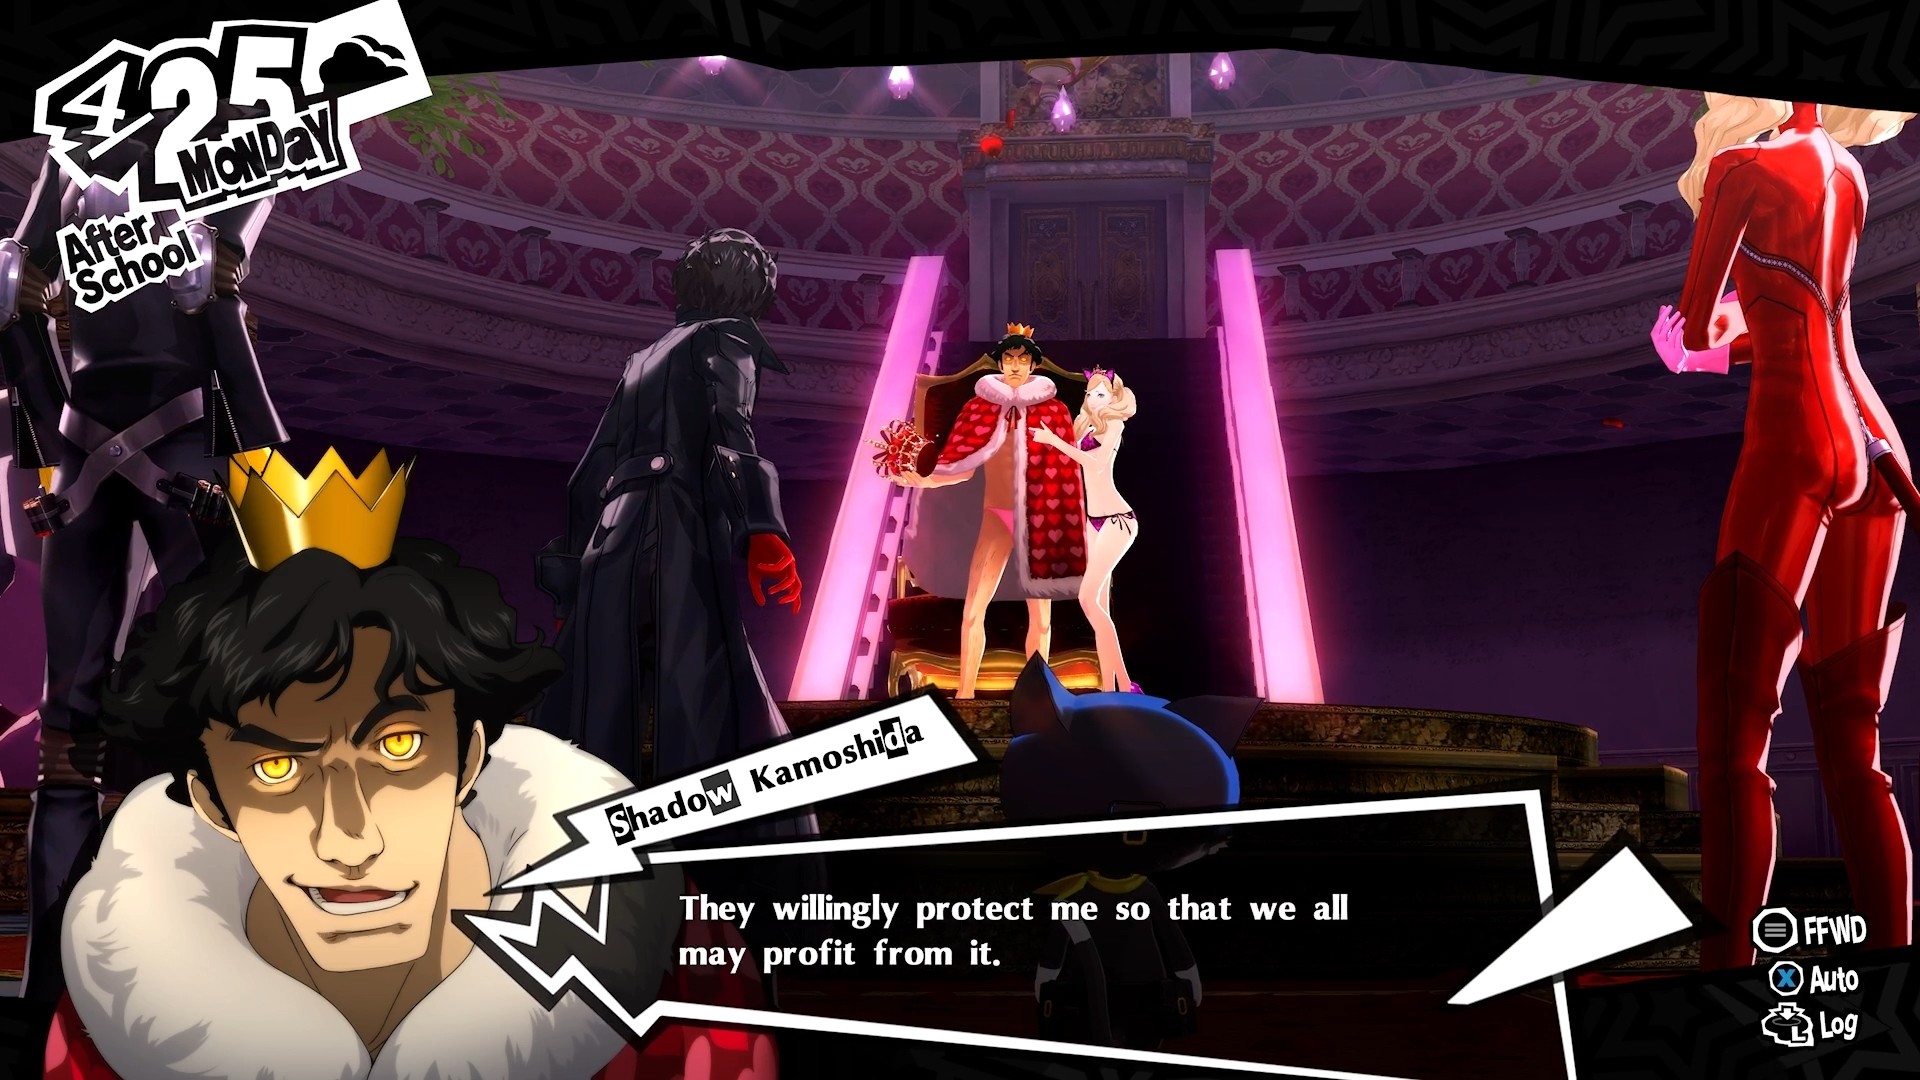 in Persona 5 Royal, Shadow Kamoshida confronts the group.